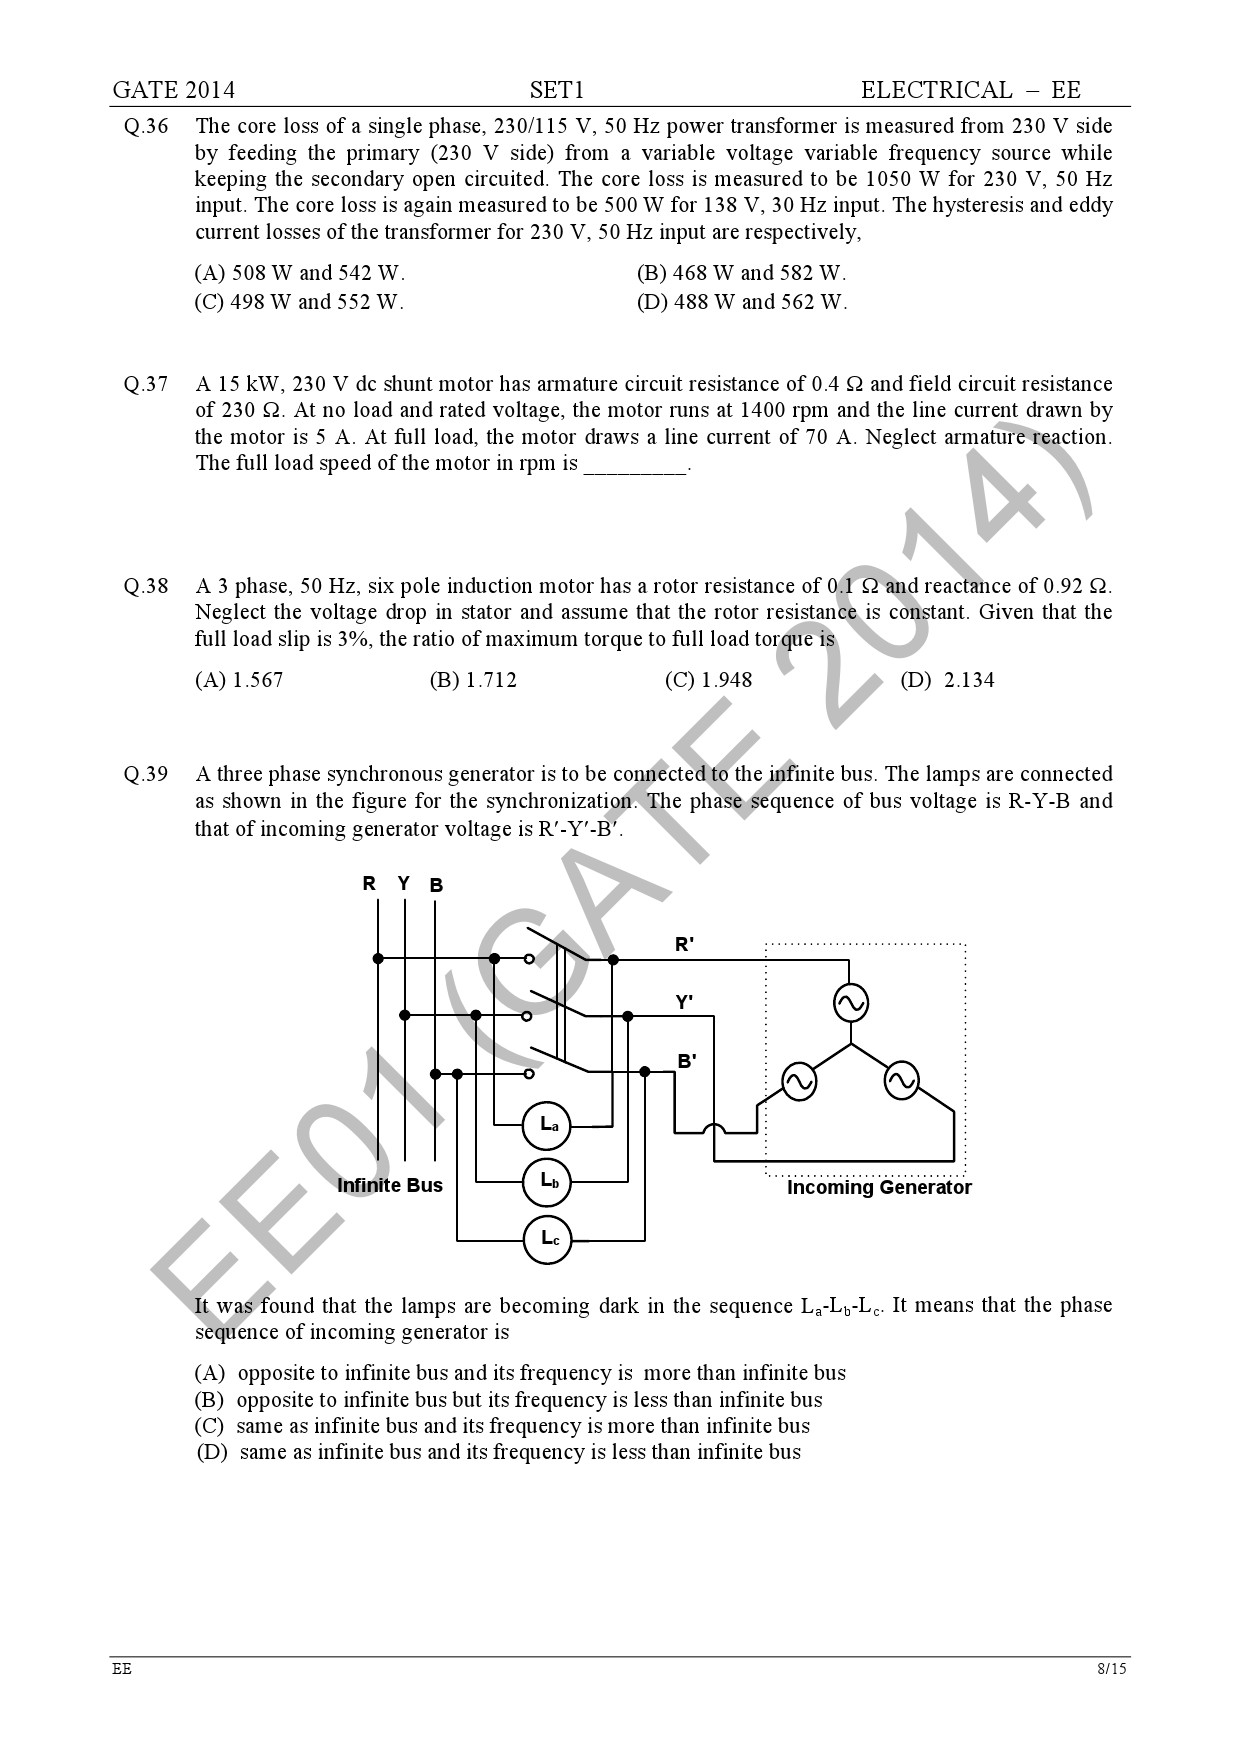 GATE Exam Question Paper 2014 Electrical Engineering Set 1 14